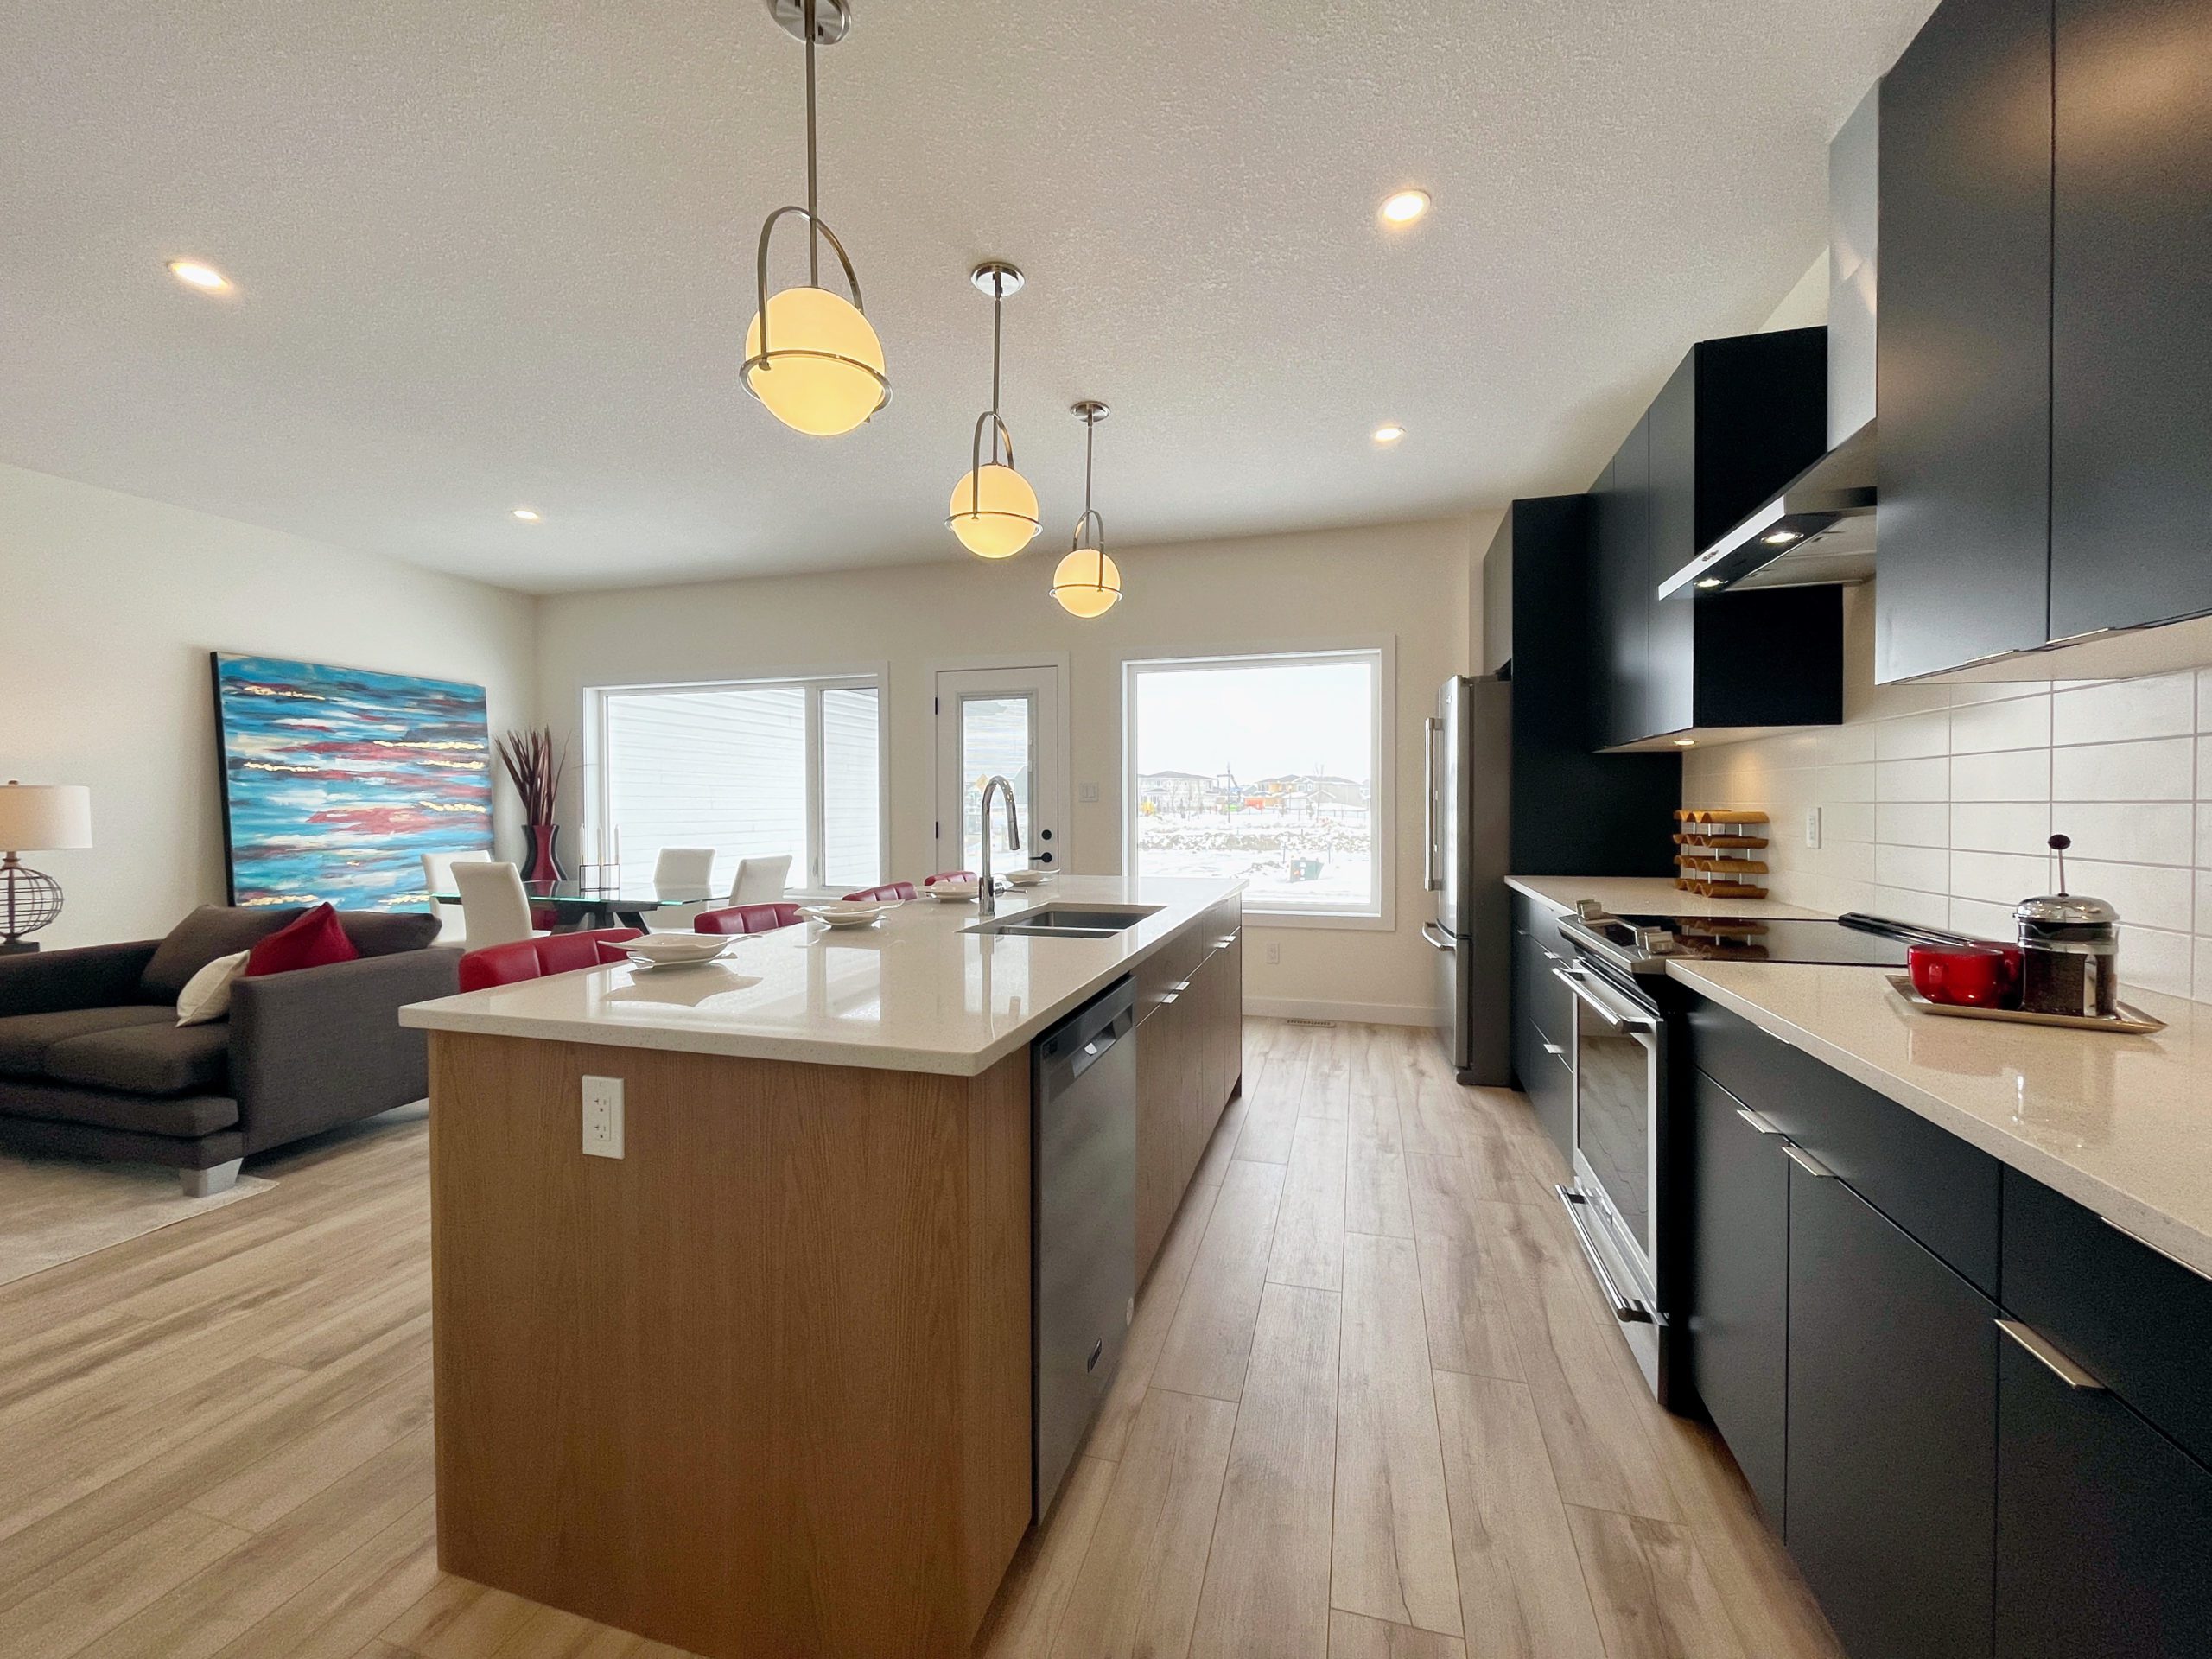 Shows the kitchen with a center island adjacent to open-concept living space.